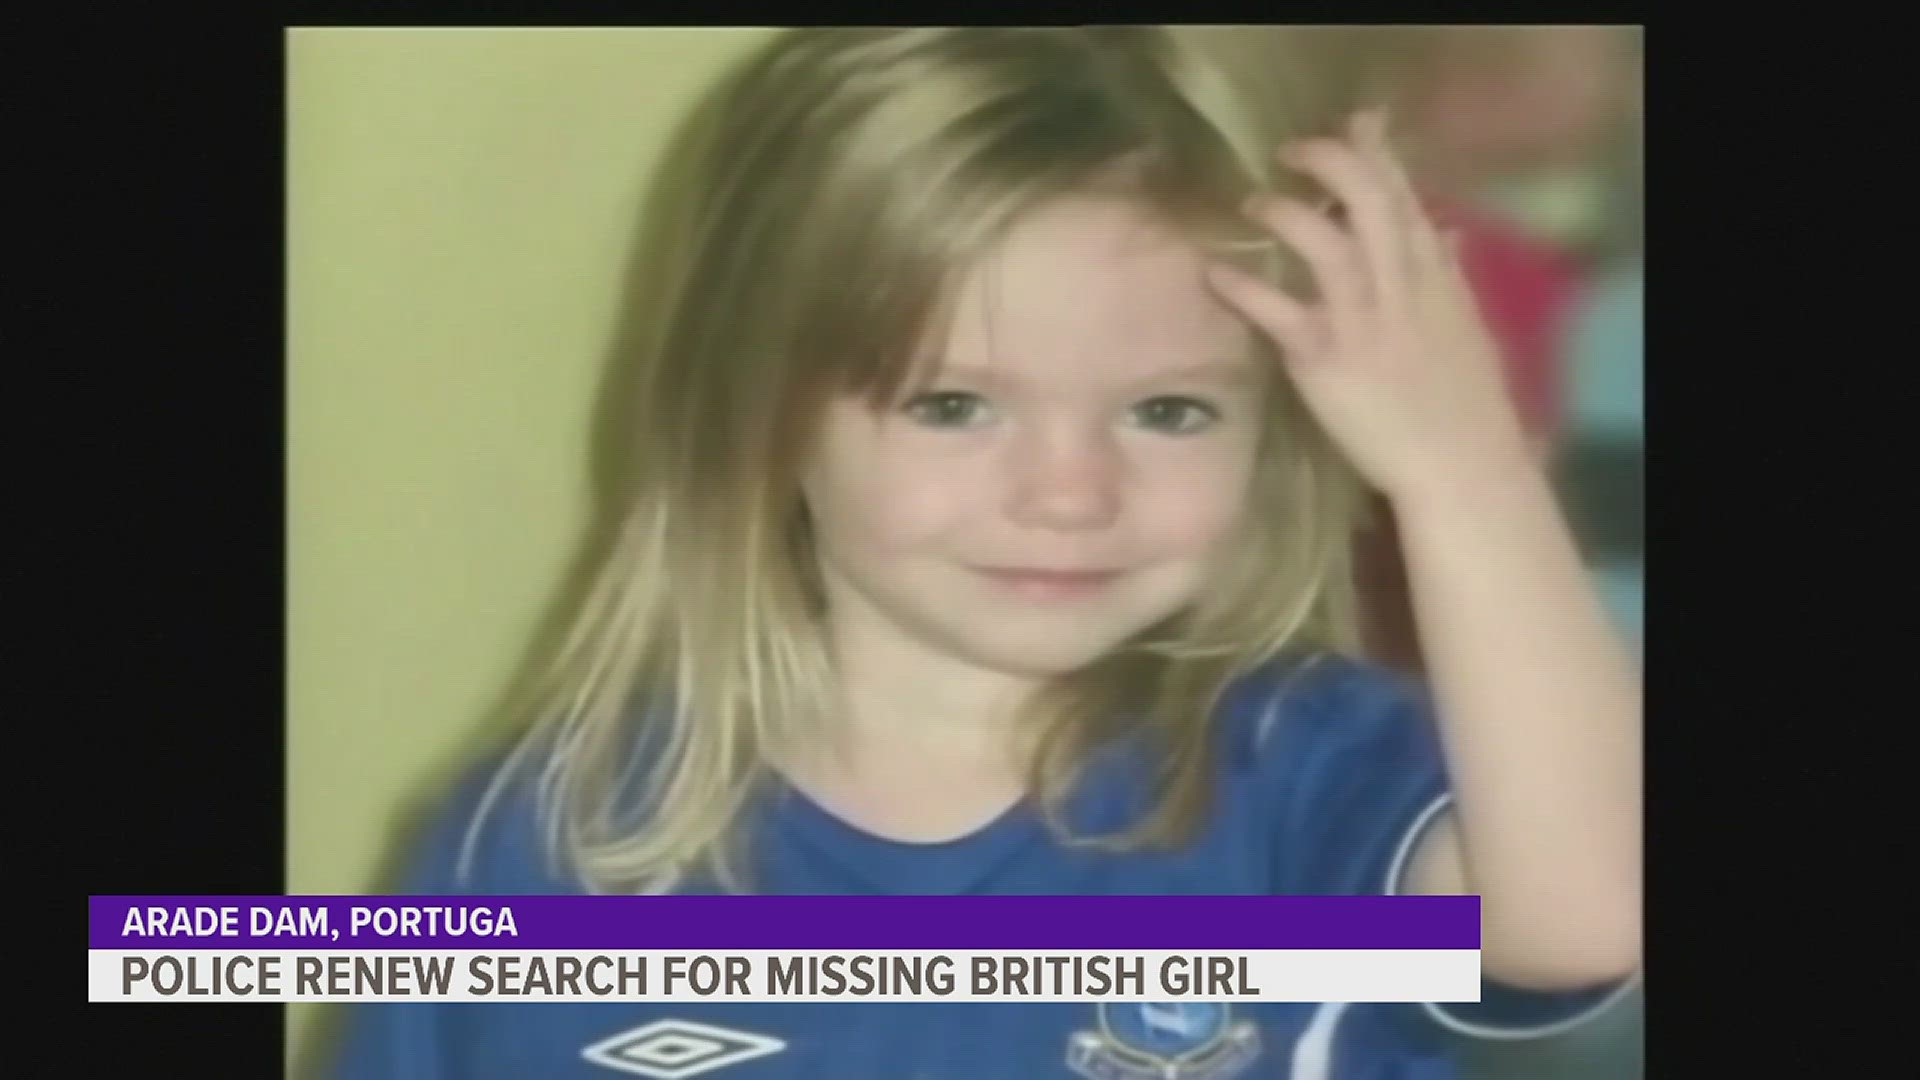 Portuguese police have resumed their search for Madeleine McCann. The British child who disappeared 16 years ago.